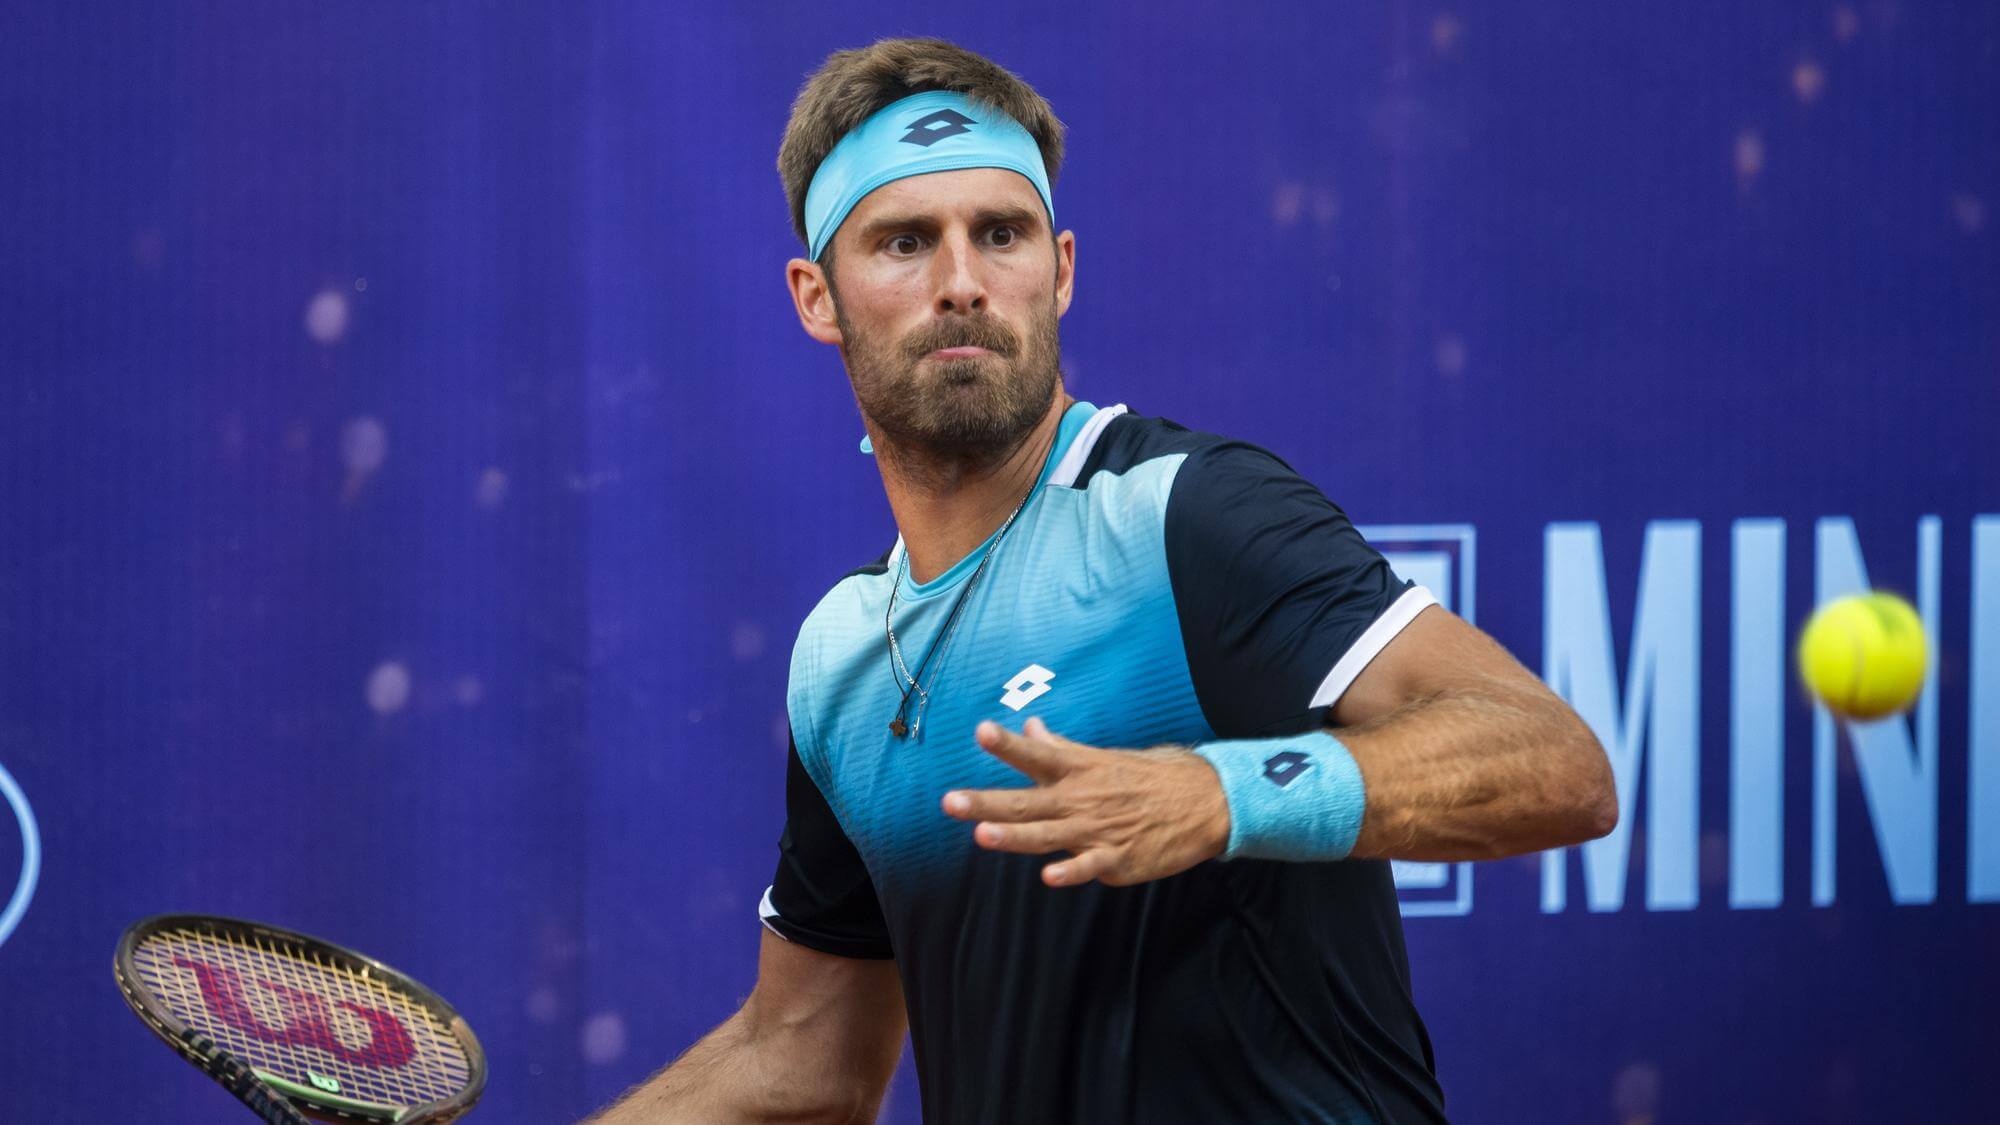 Norbert Gombos si zahrá na French Open 2023